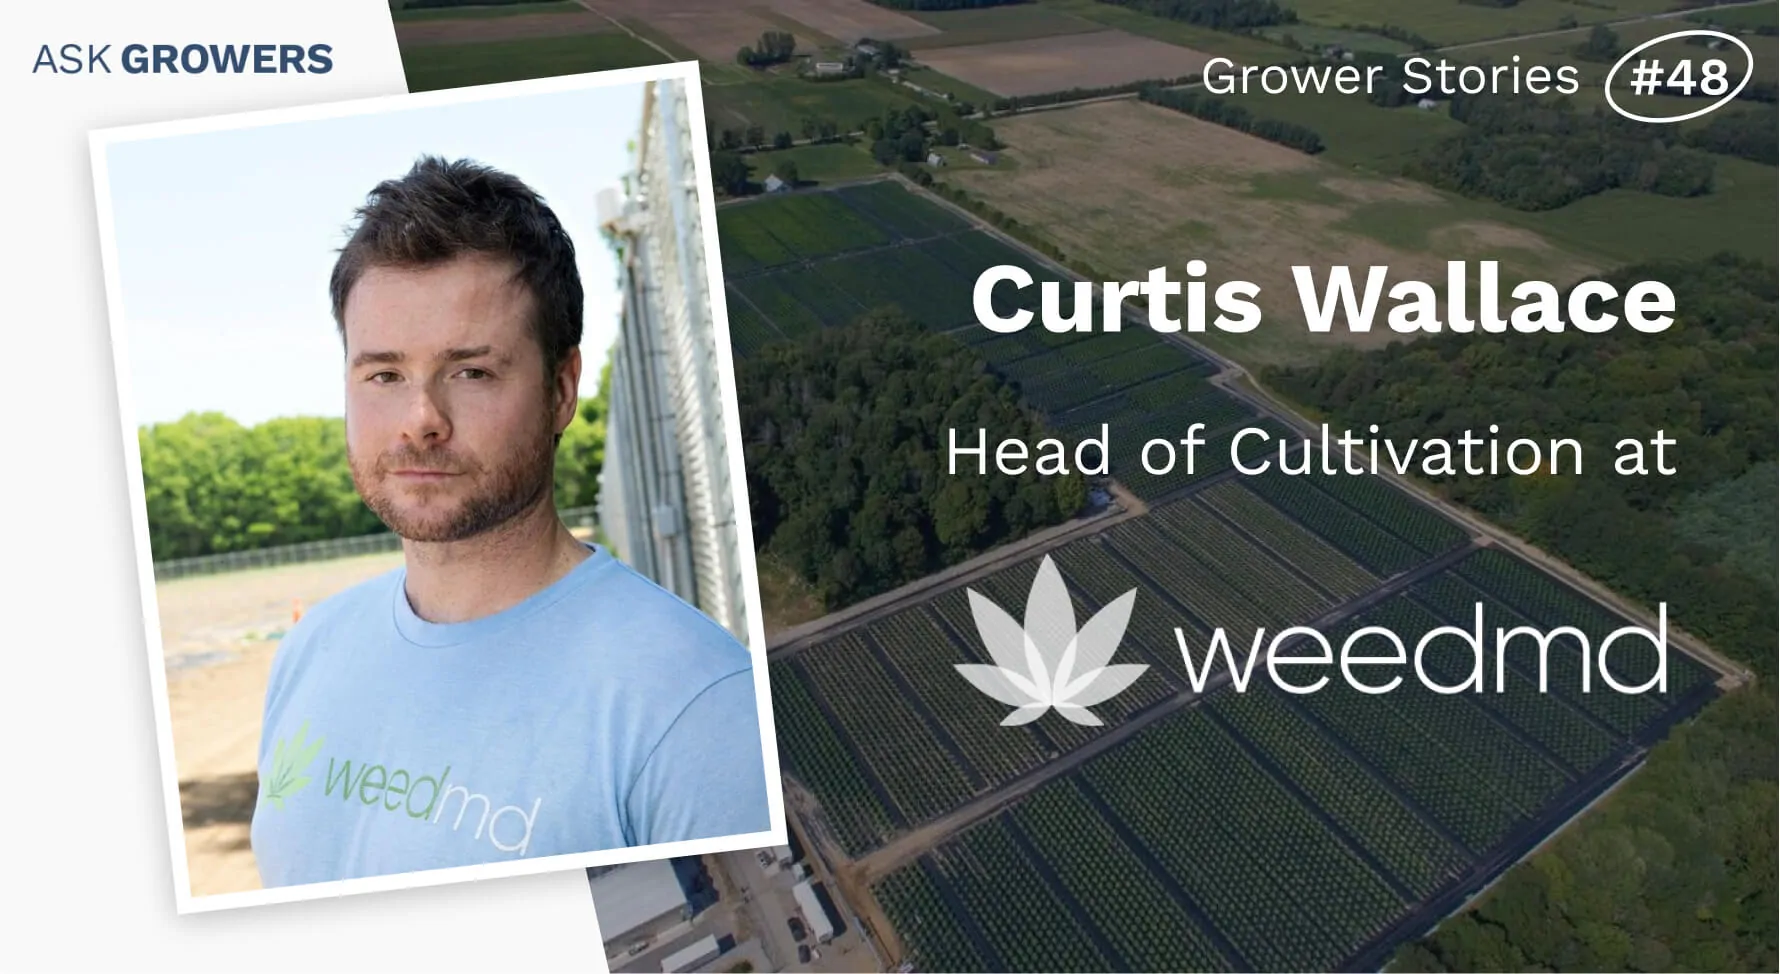 Grower Stories #48: Curtis Wallace